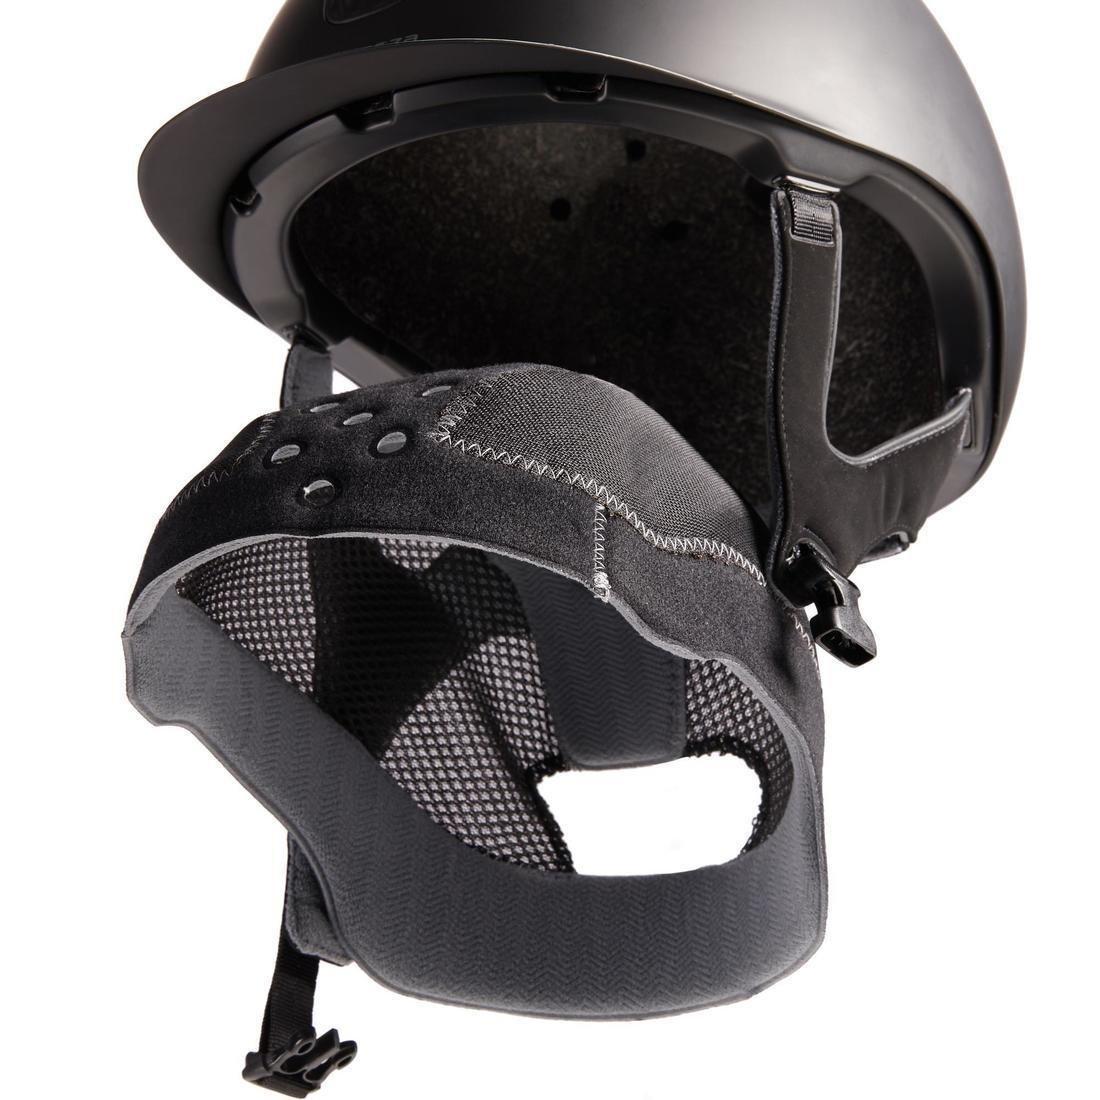 FOUGANZA - Adult And Kids Horse Riding Helmet - 520, Black